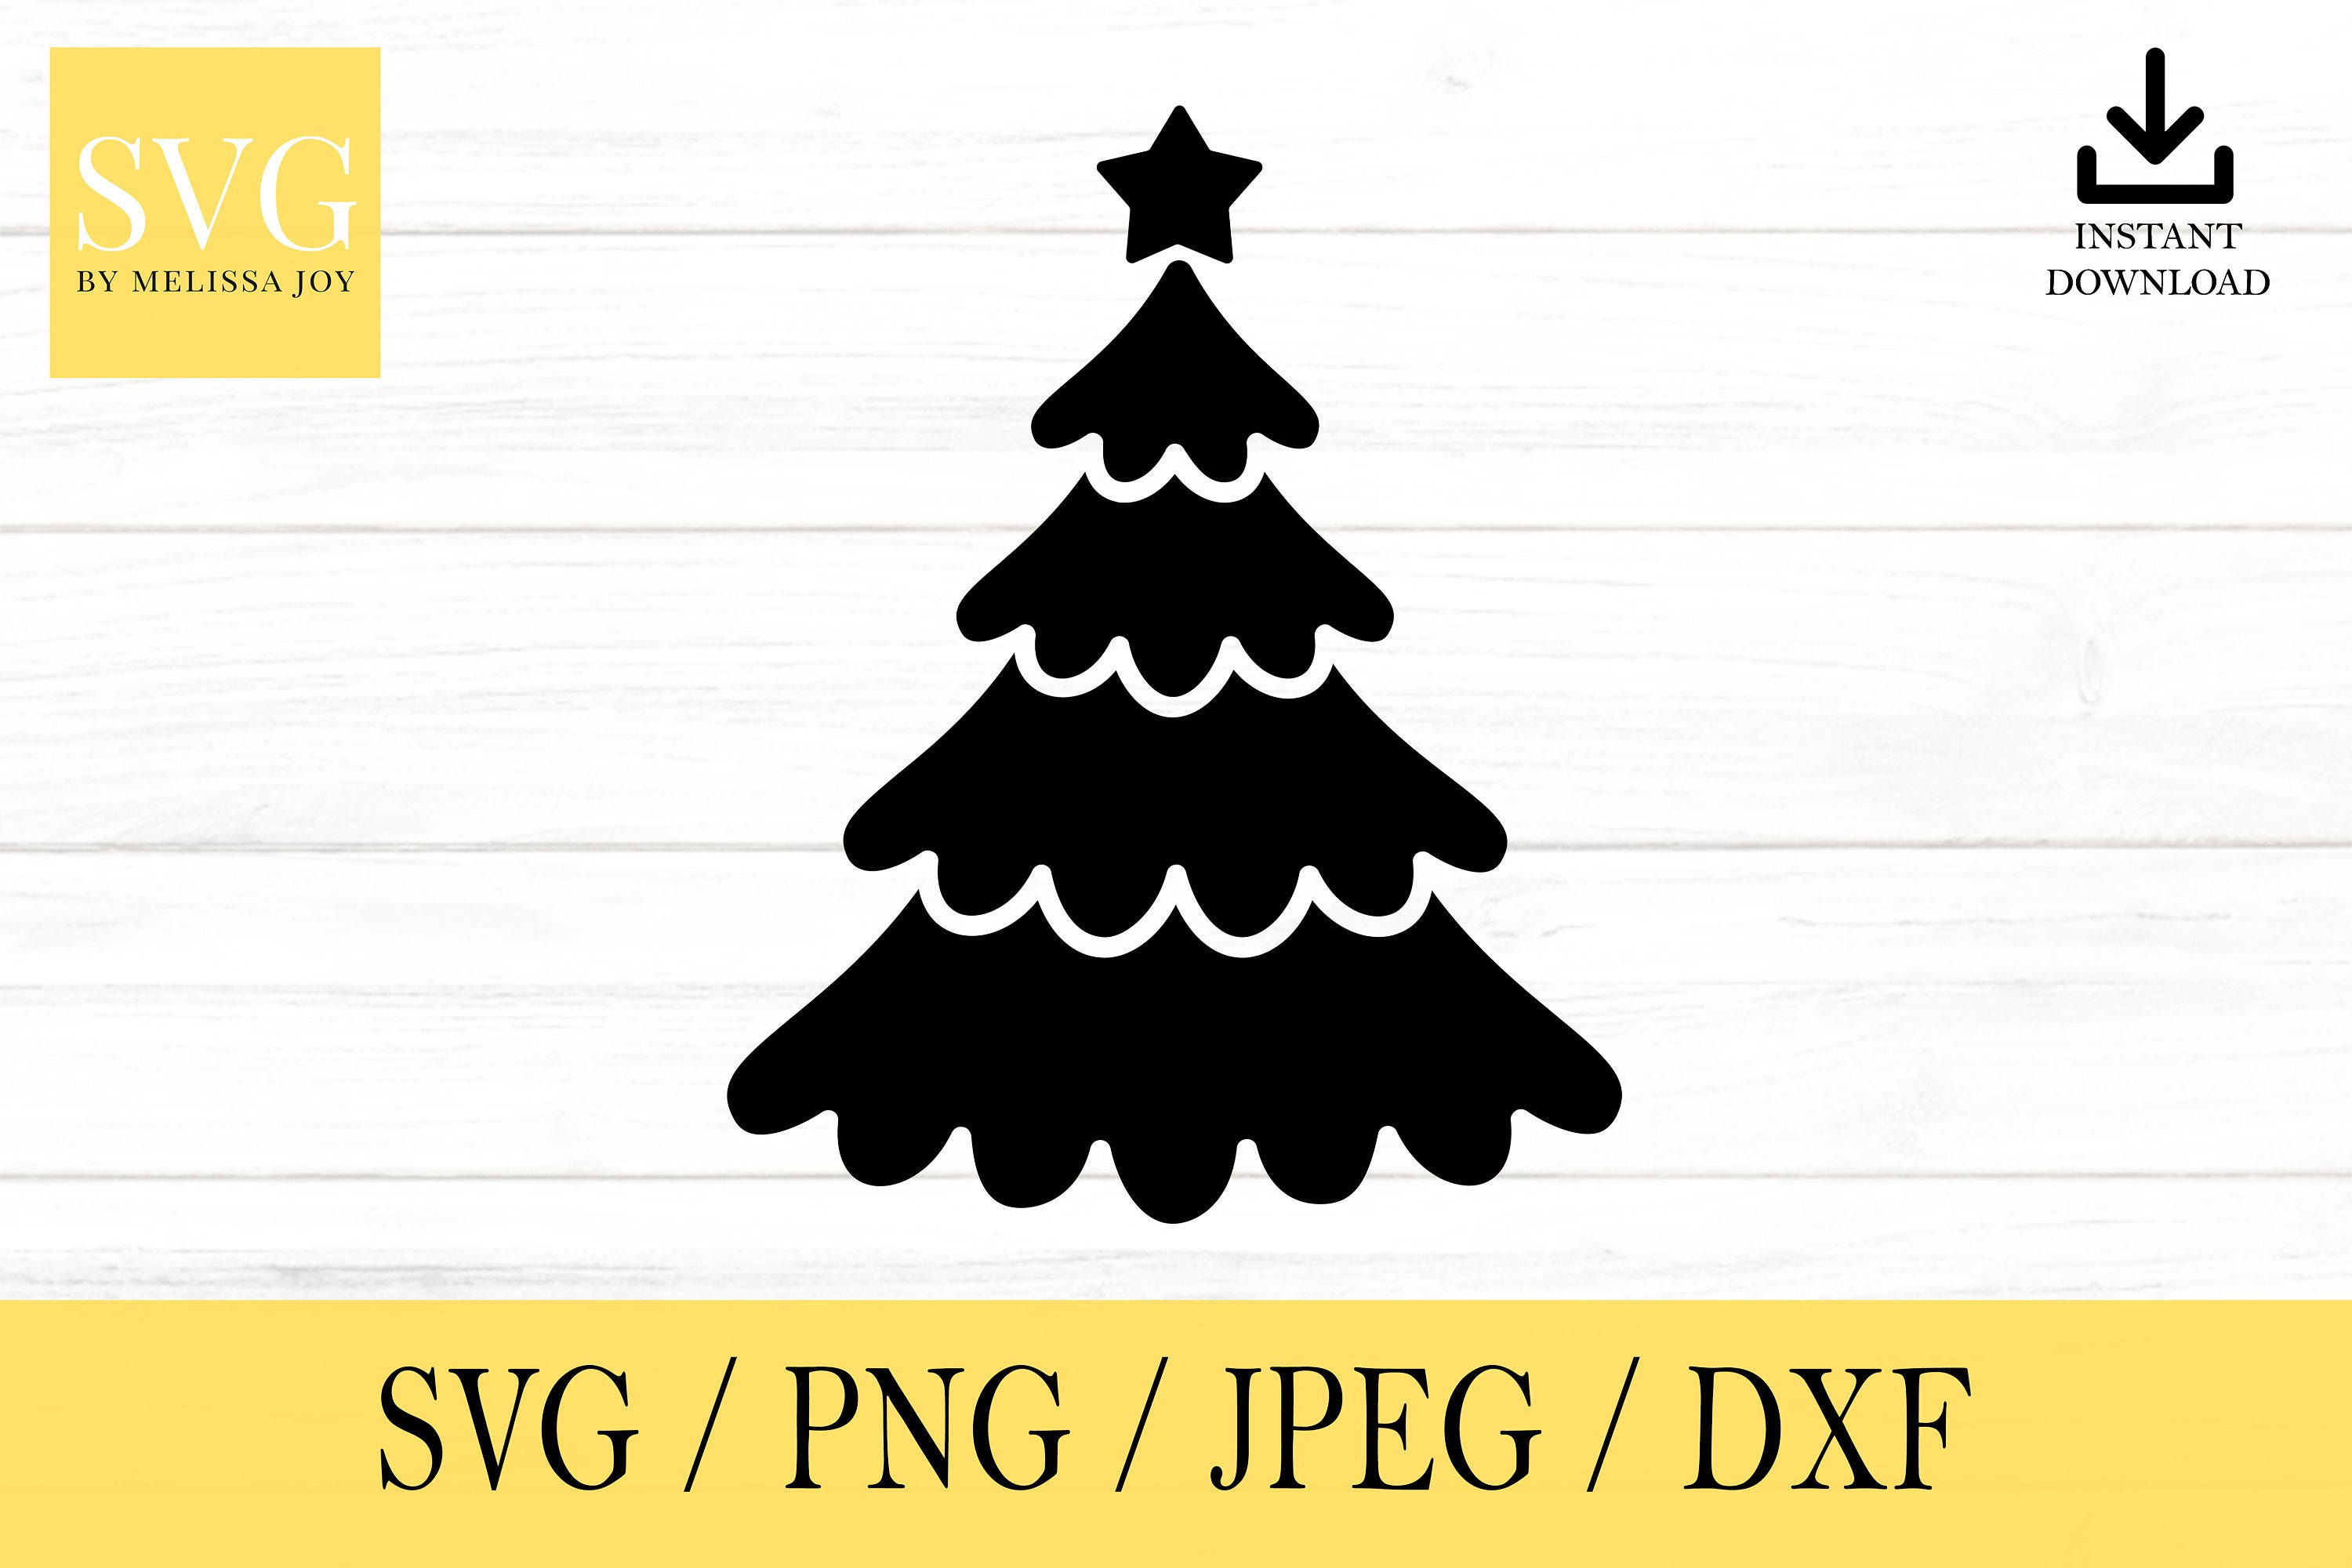 Christmas Tree svg, Holiday SVG, svg, png, dxf, jpeg, Digital Download, Cut File, Cricut, Silhouette, Glowforge, Svg files for cricut